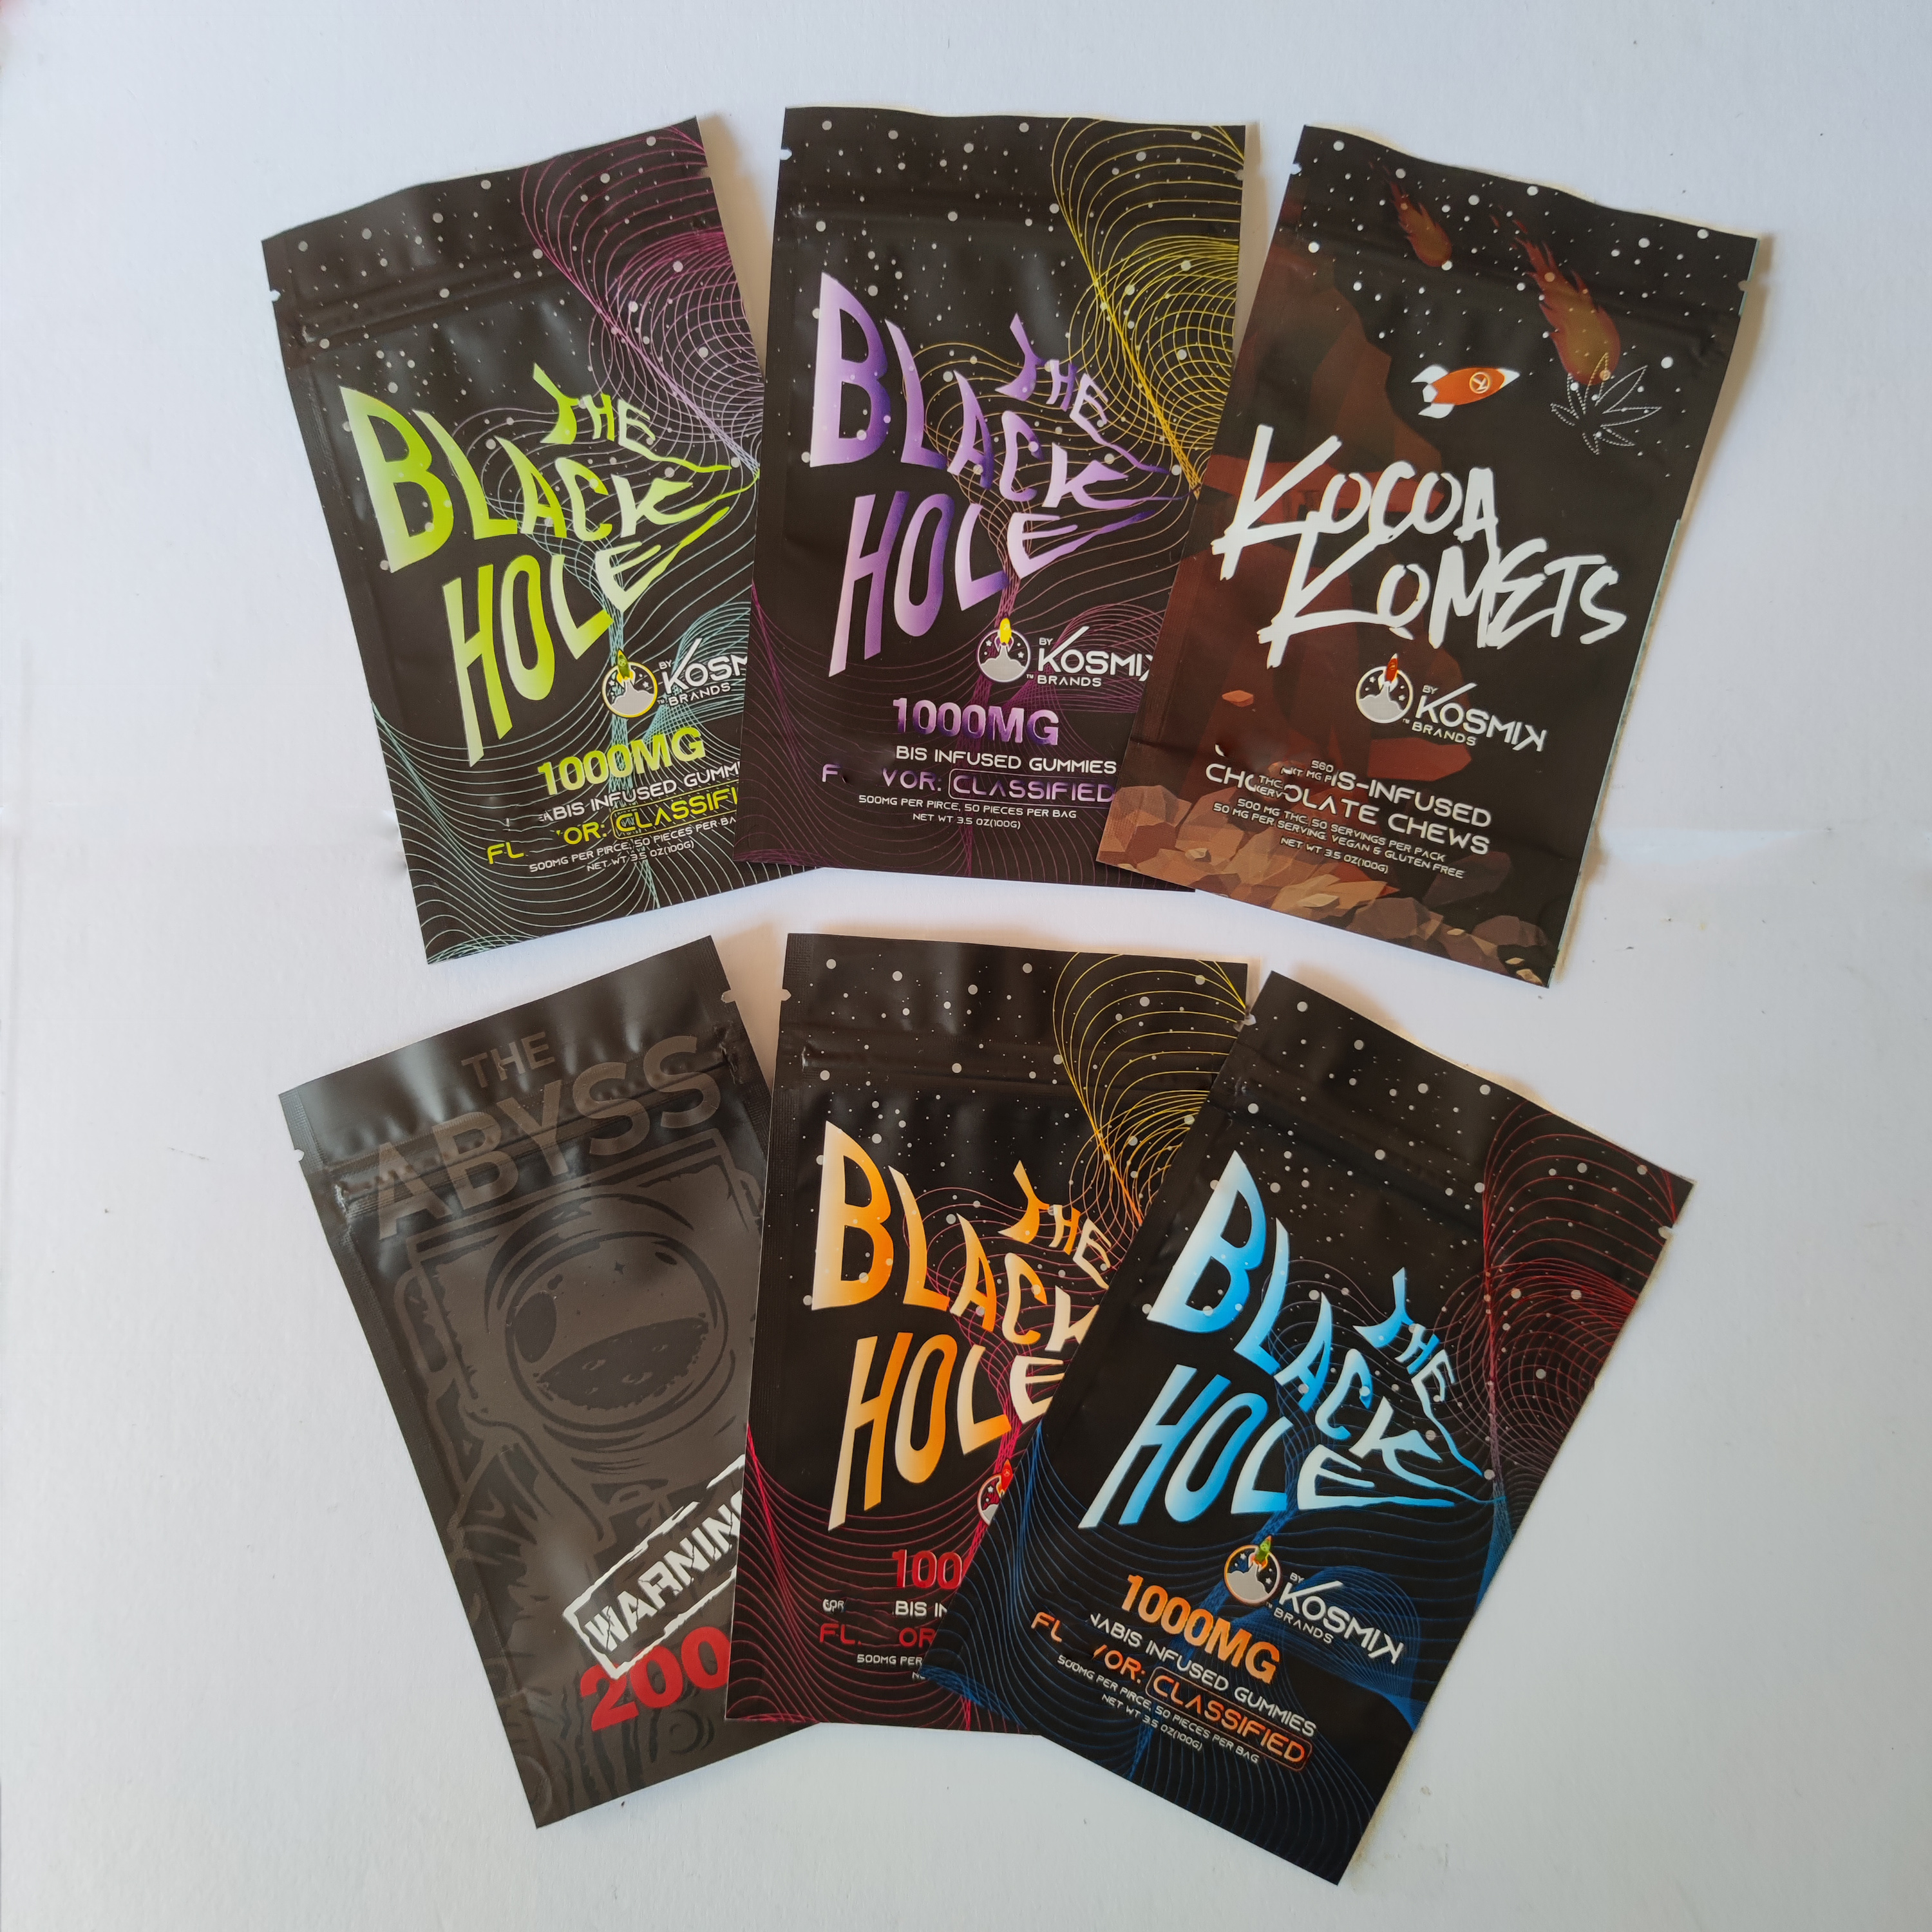 

New The black hole kosmik brands sour fruit gummies packing bags 1000mg 500mg servings per pack per 3.5oz resealable mylar Edibles Infused Gummy zipper package bag